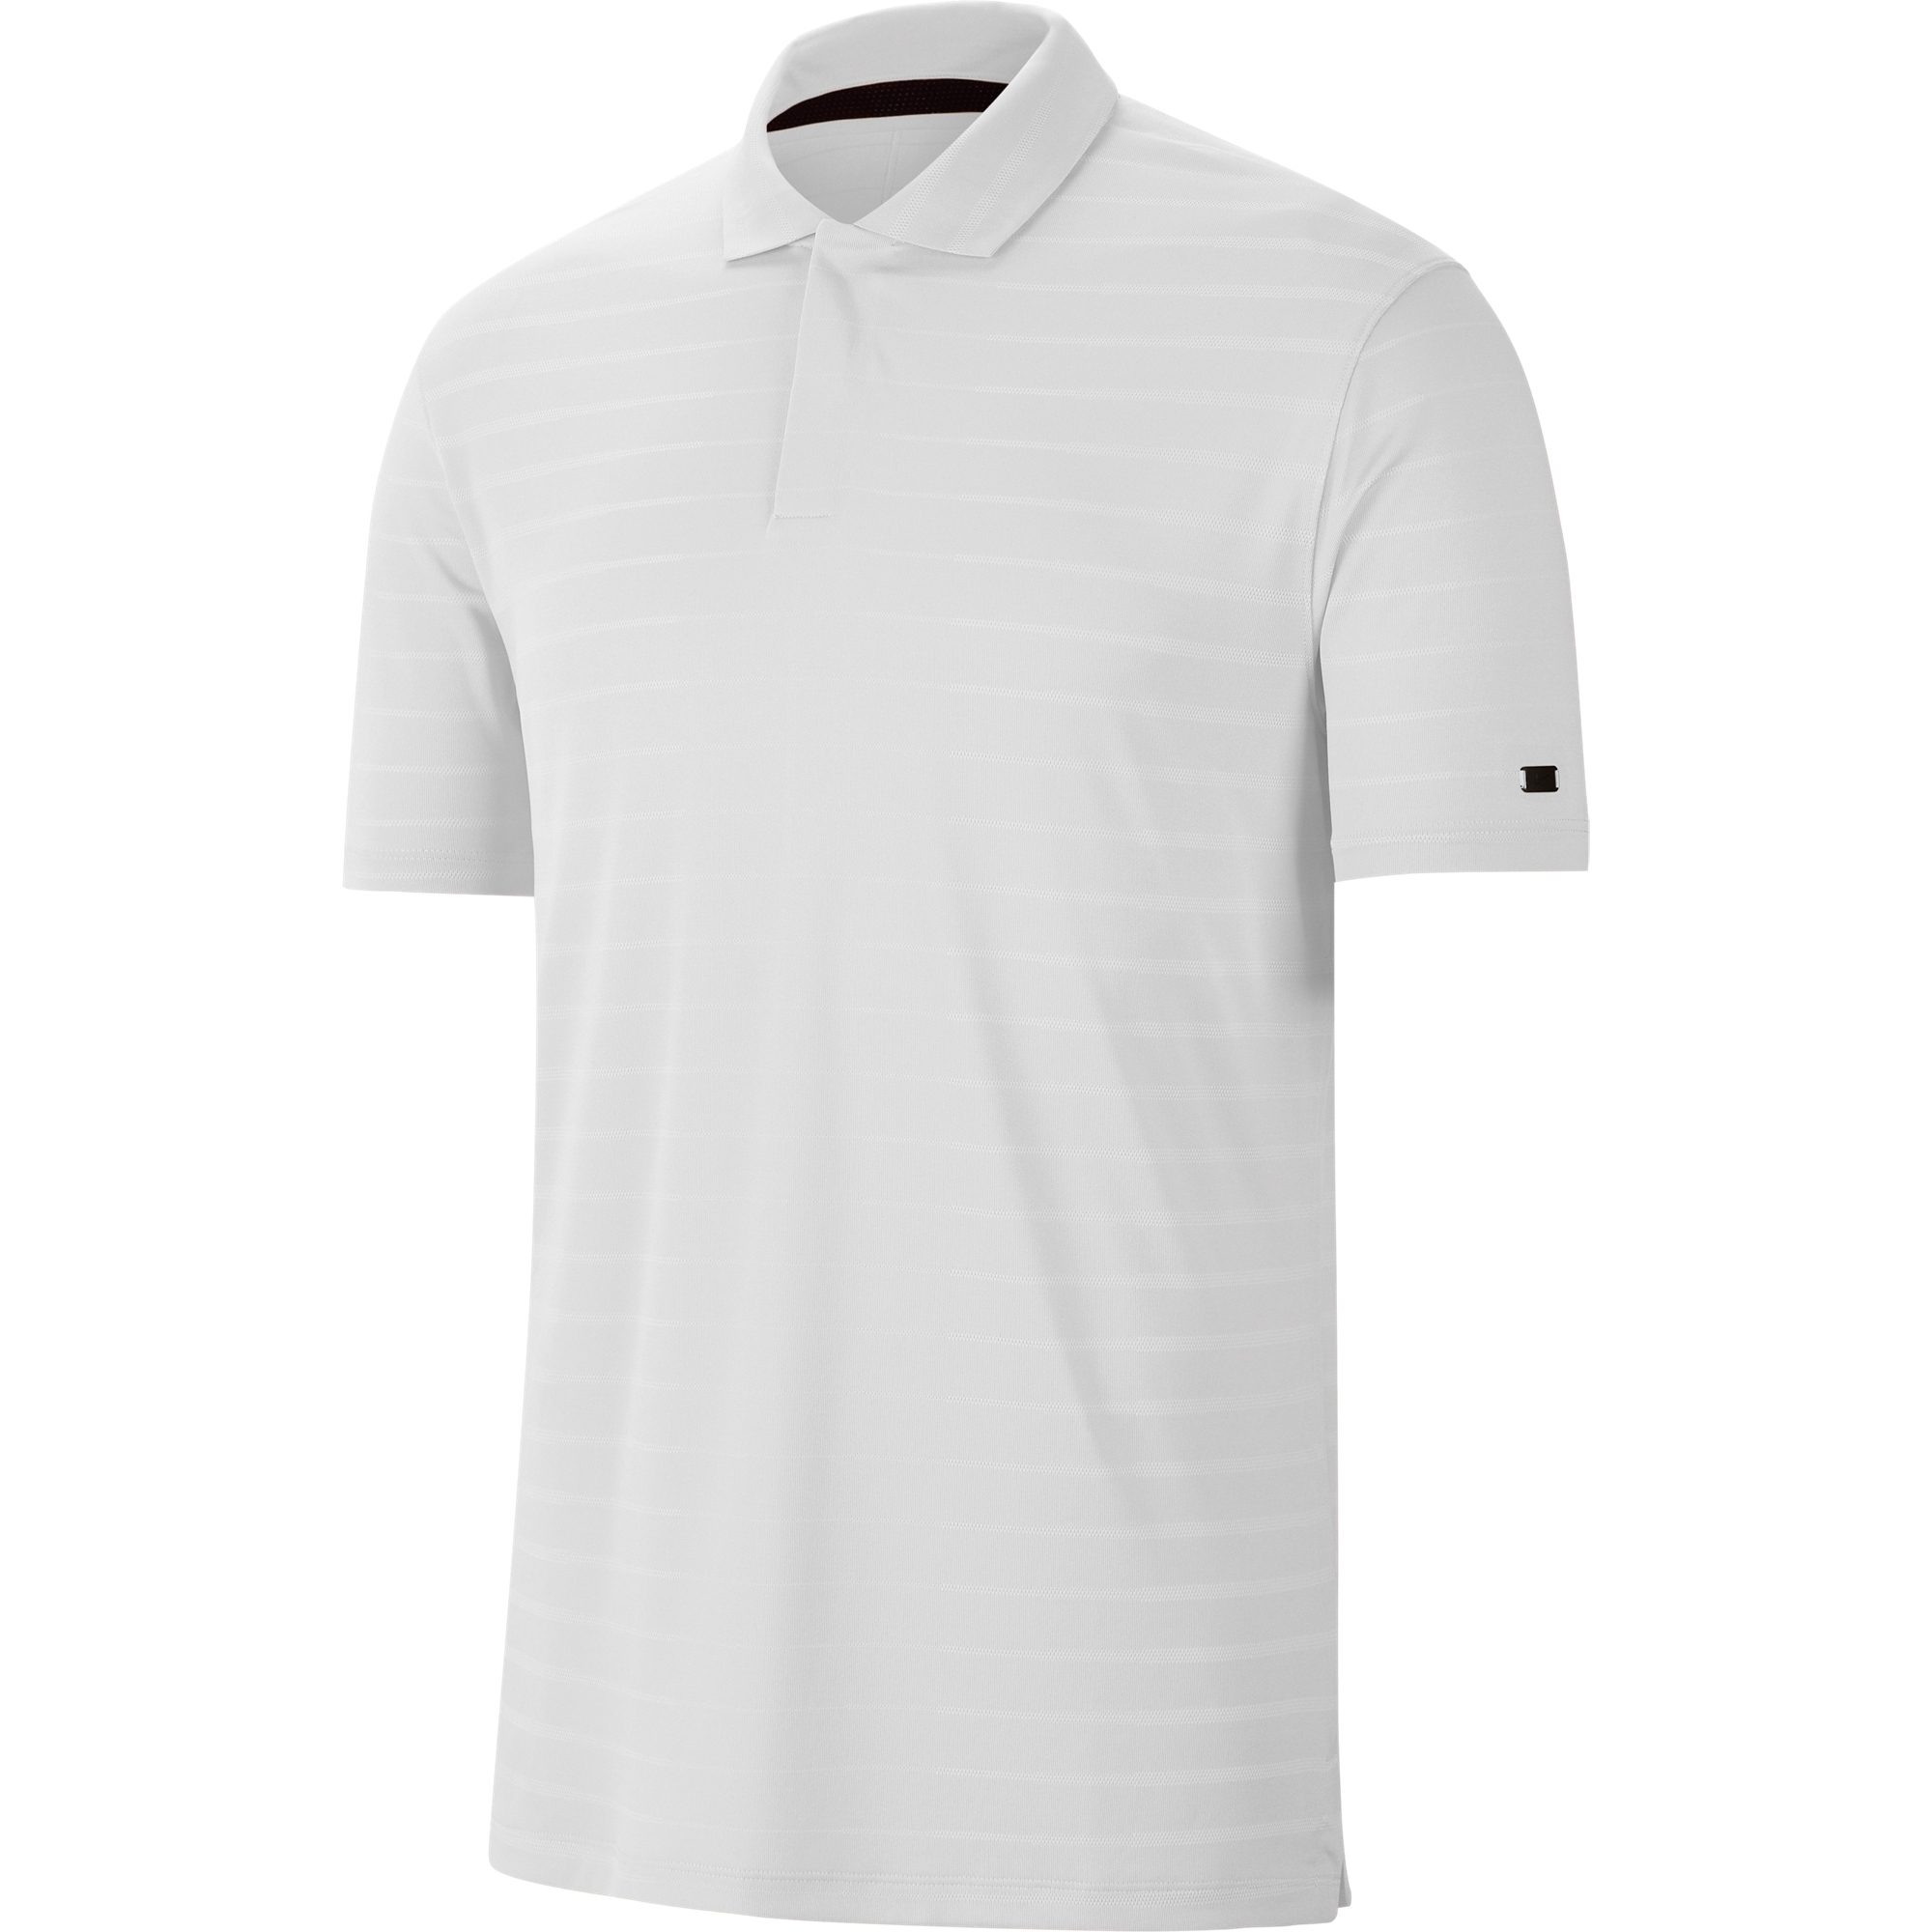 Nike Mens Dry Fit Sweat Wicking Golf Polo Shirt XL- Chest 44-48.5’